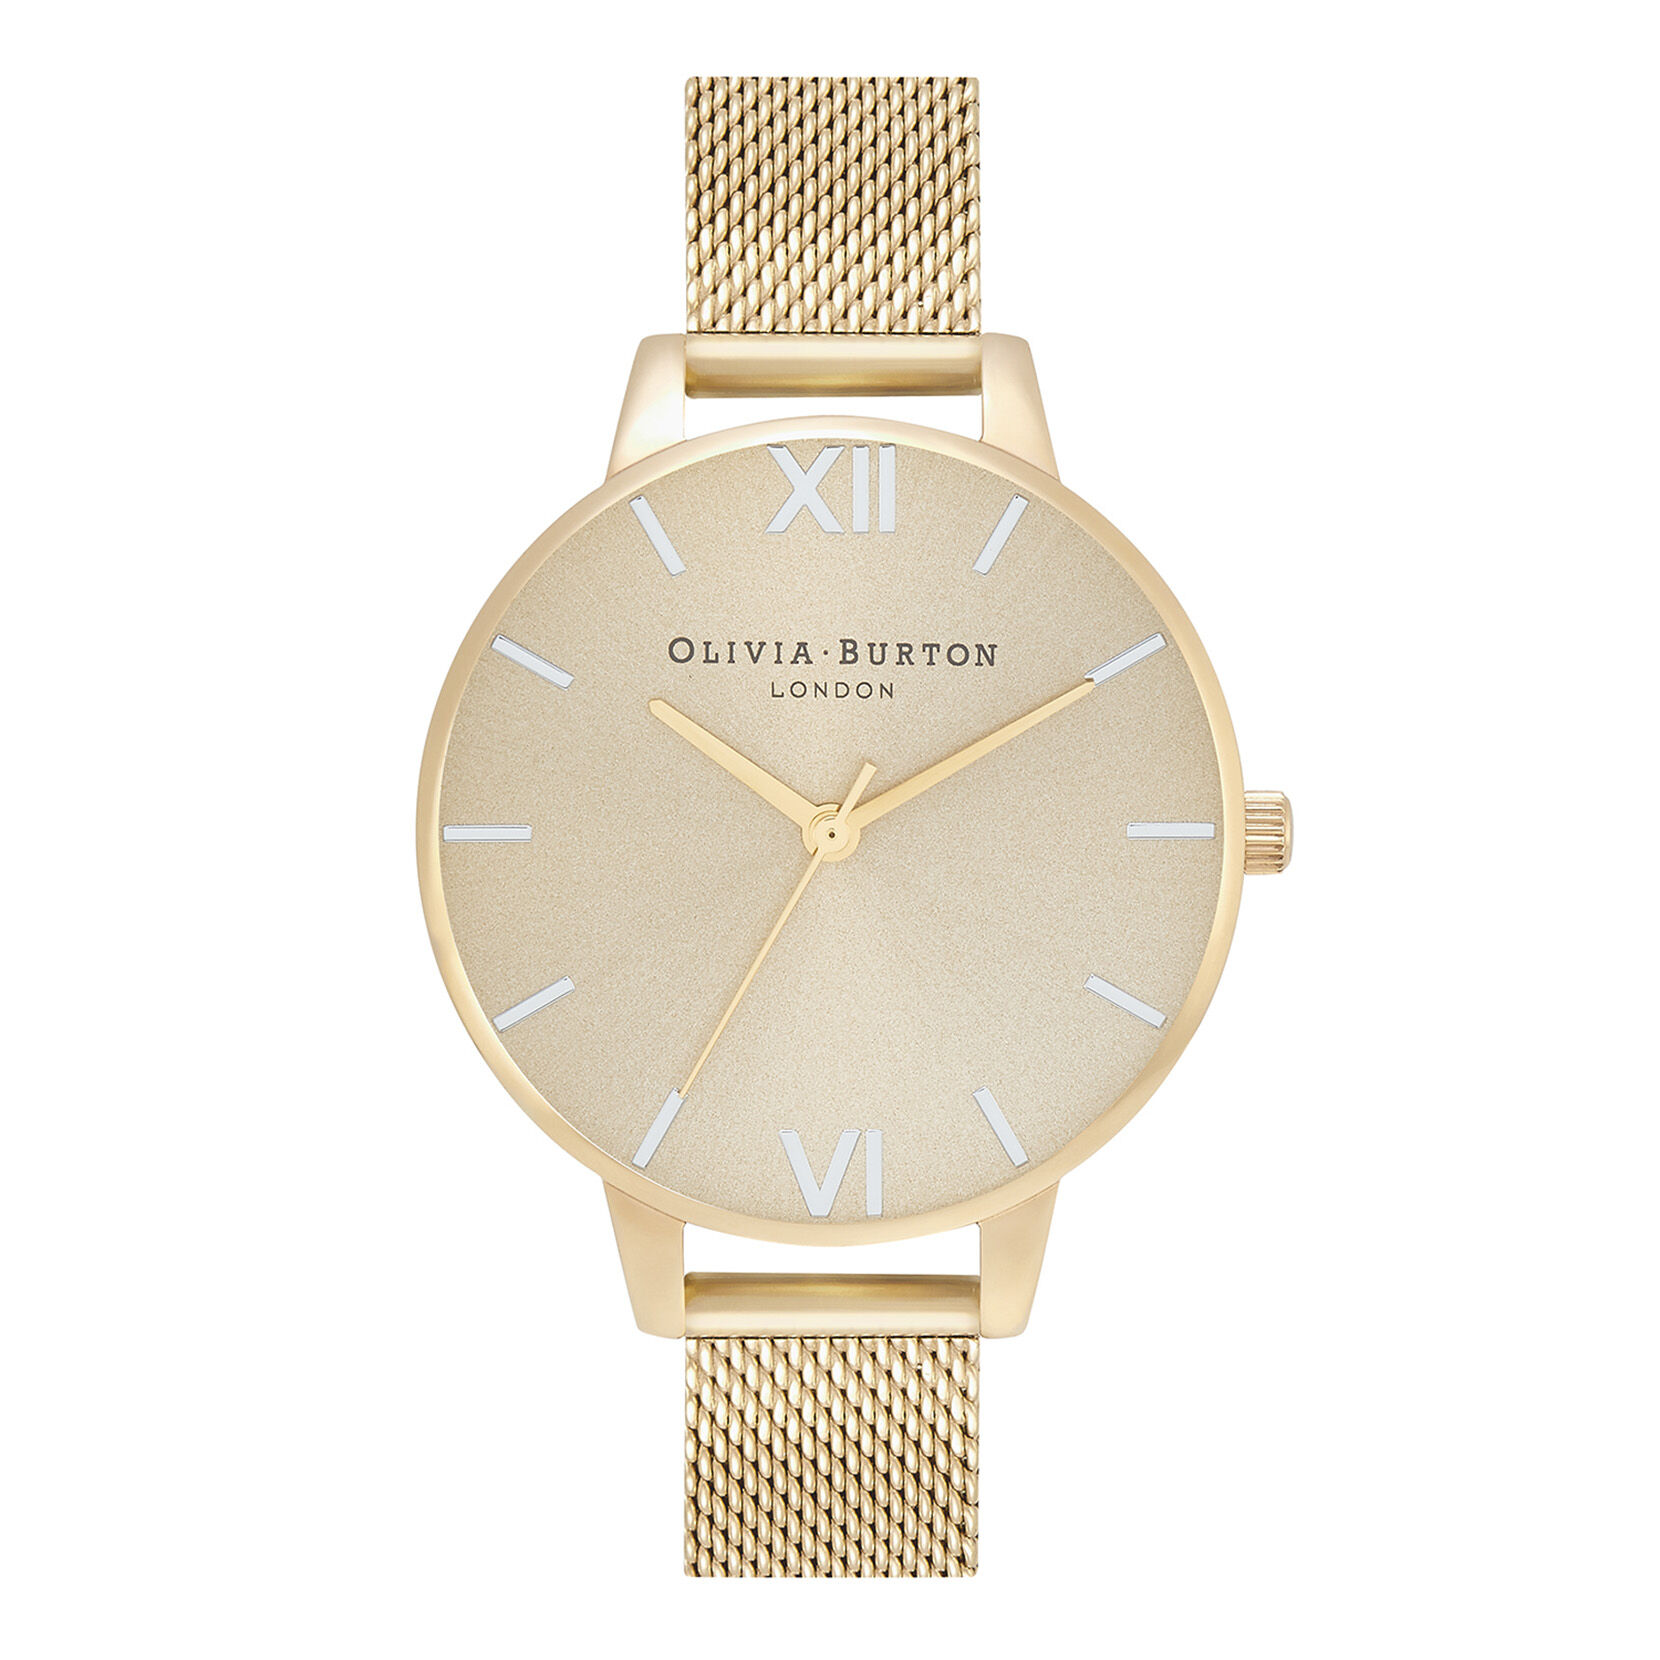 The England Demi Dial Silver & Pale Gold Mesh Watch